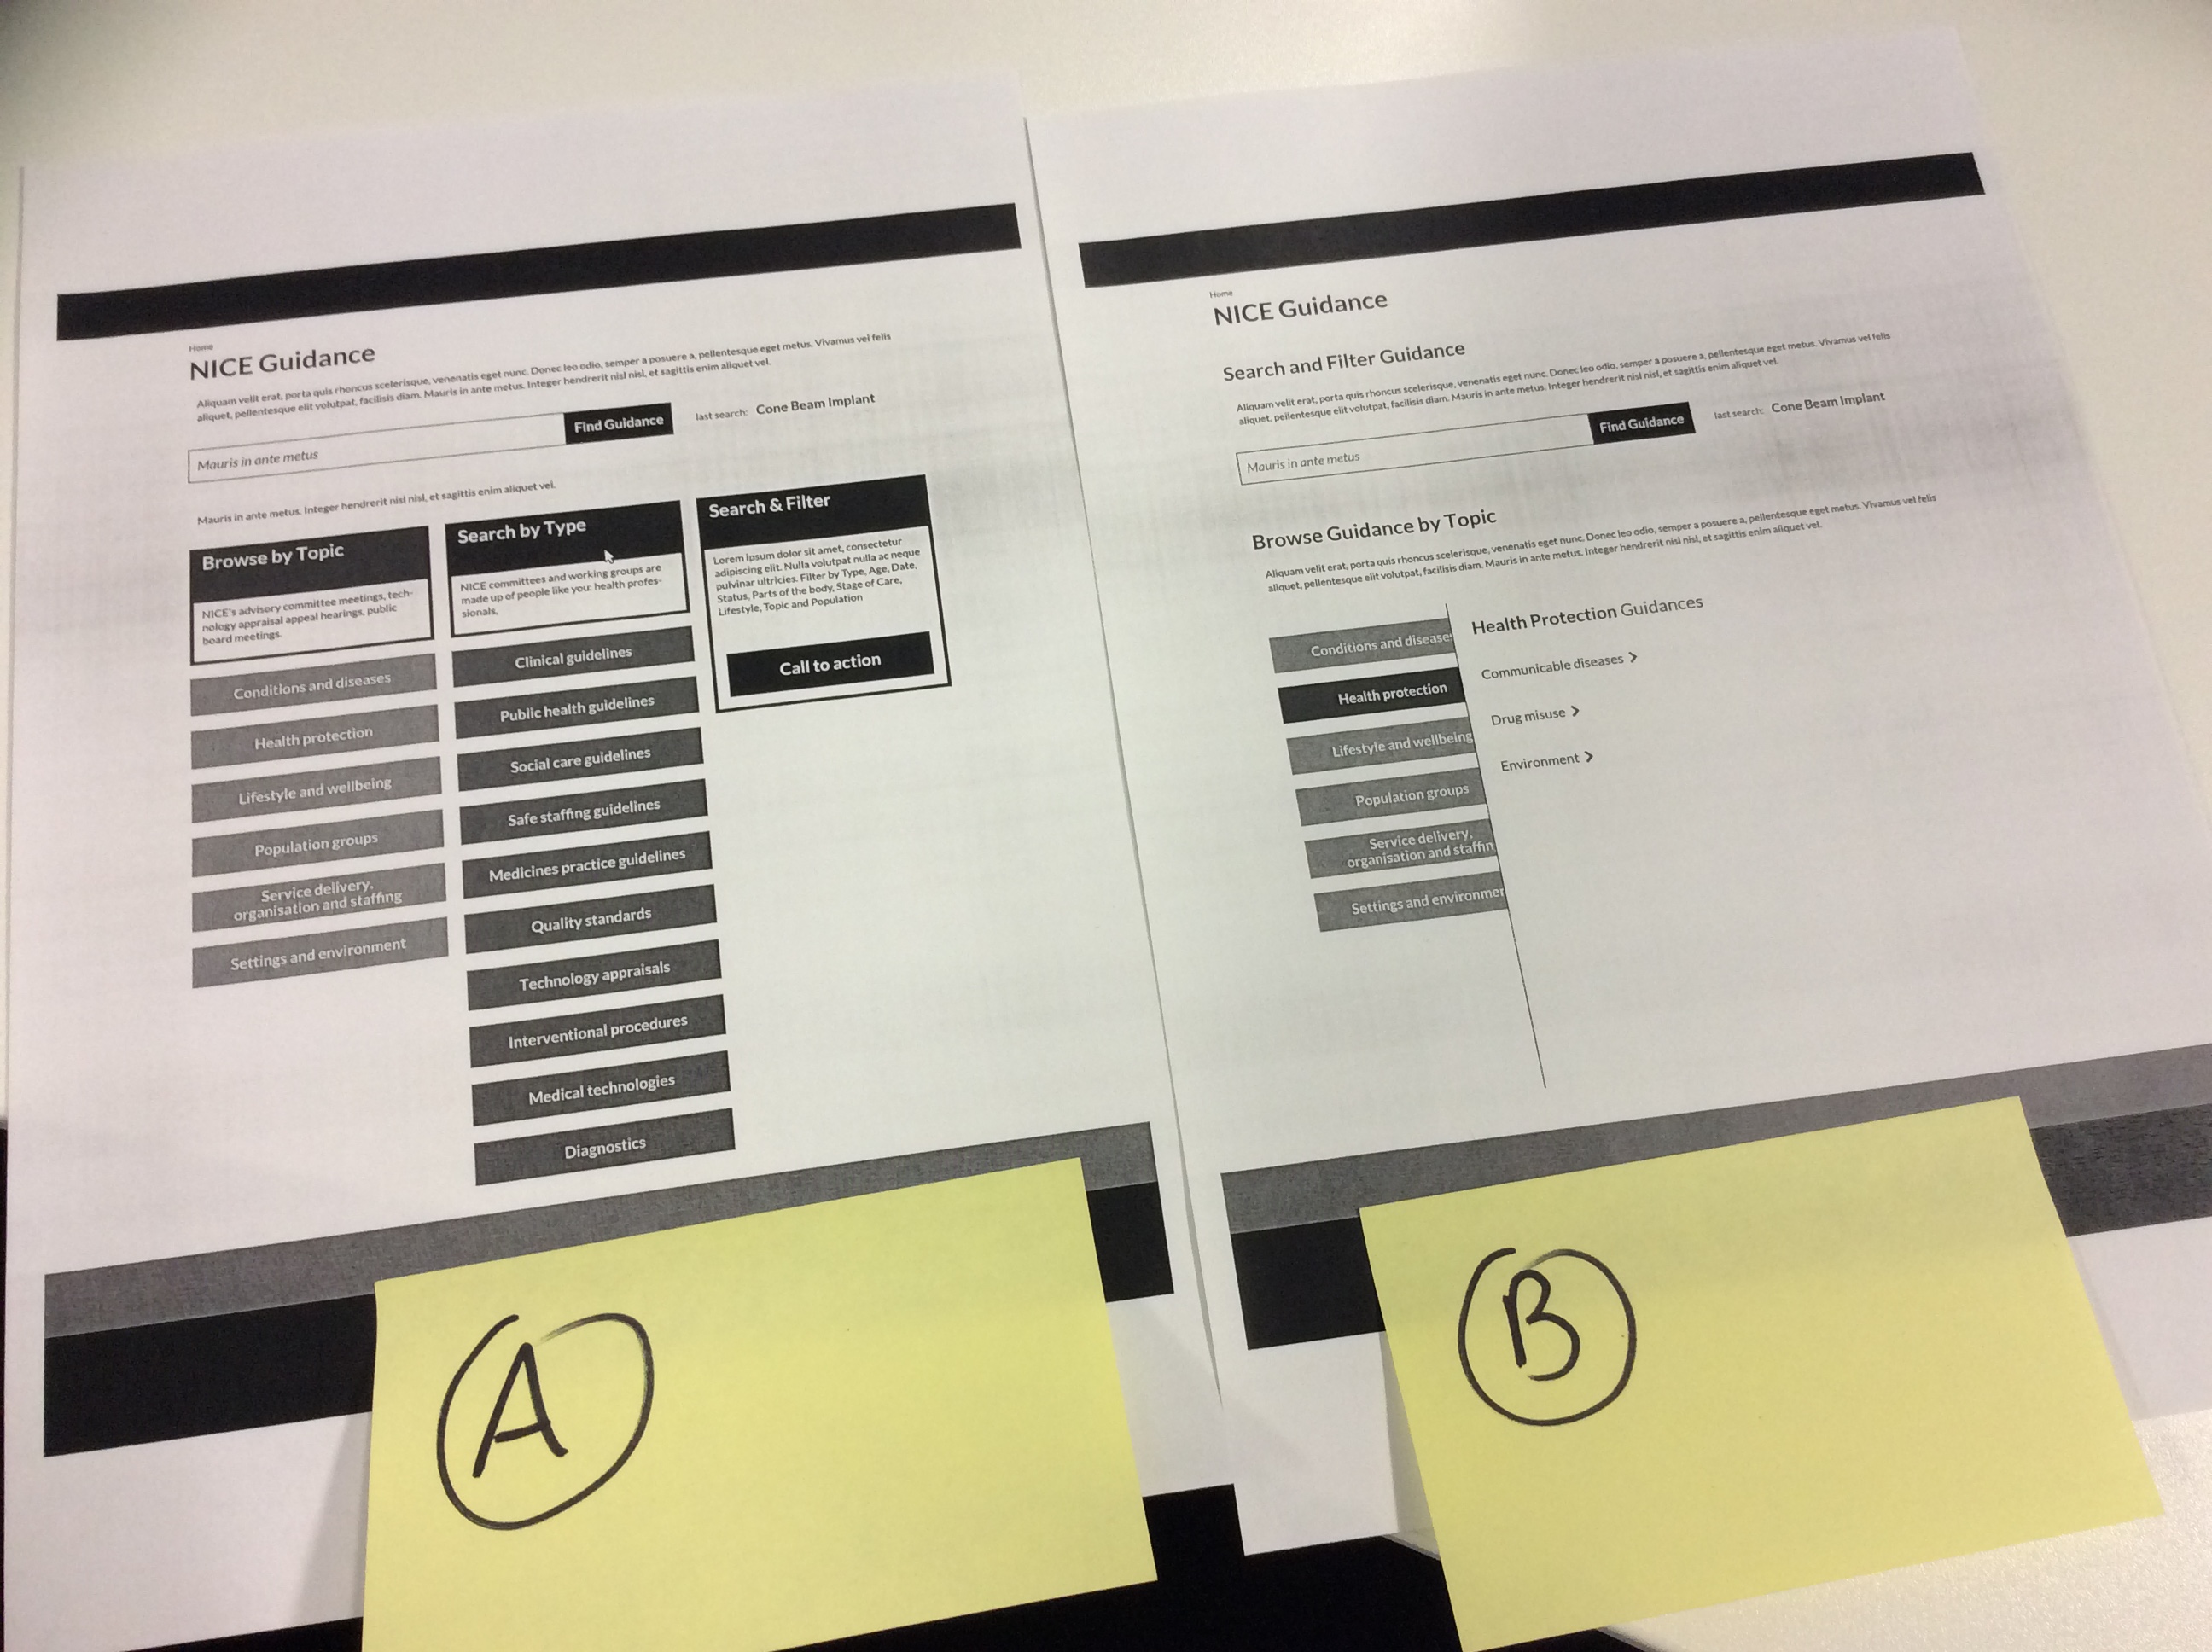 Getting started with A/B testing: Part 1 – Preparation